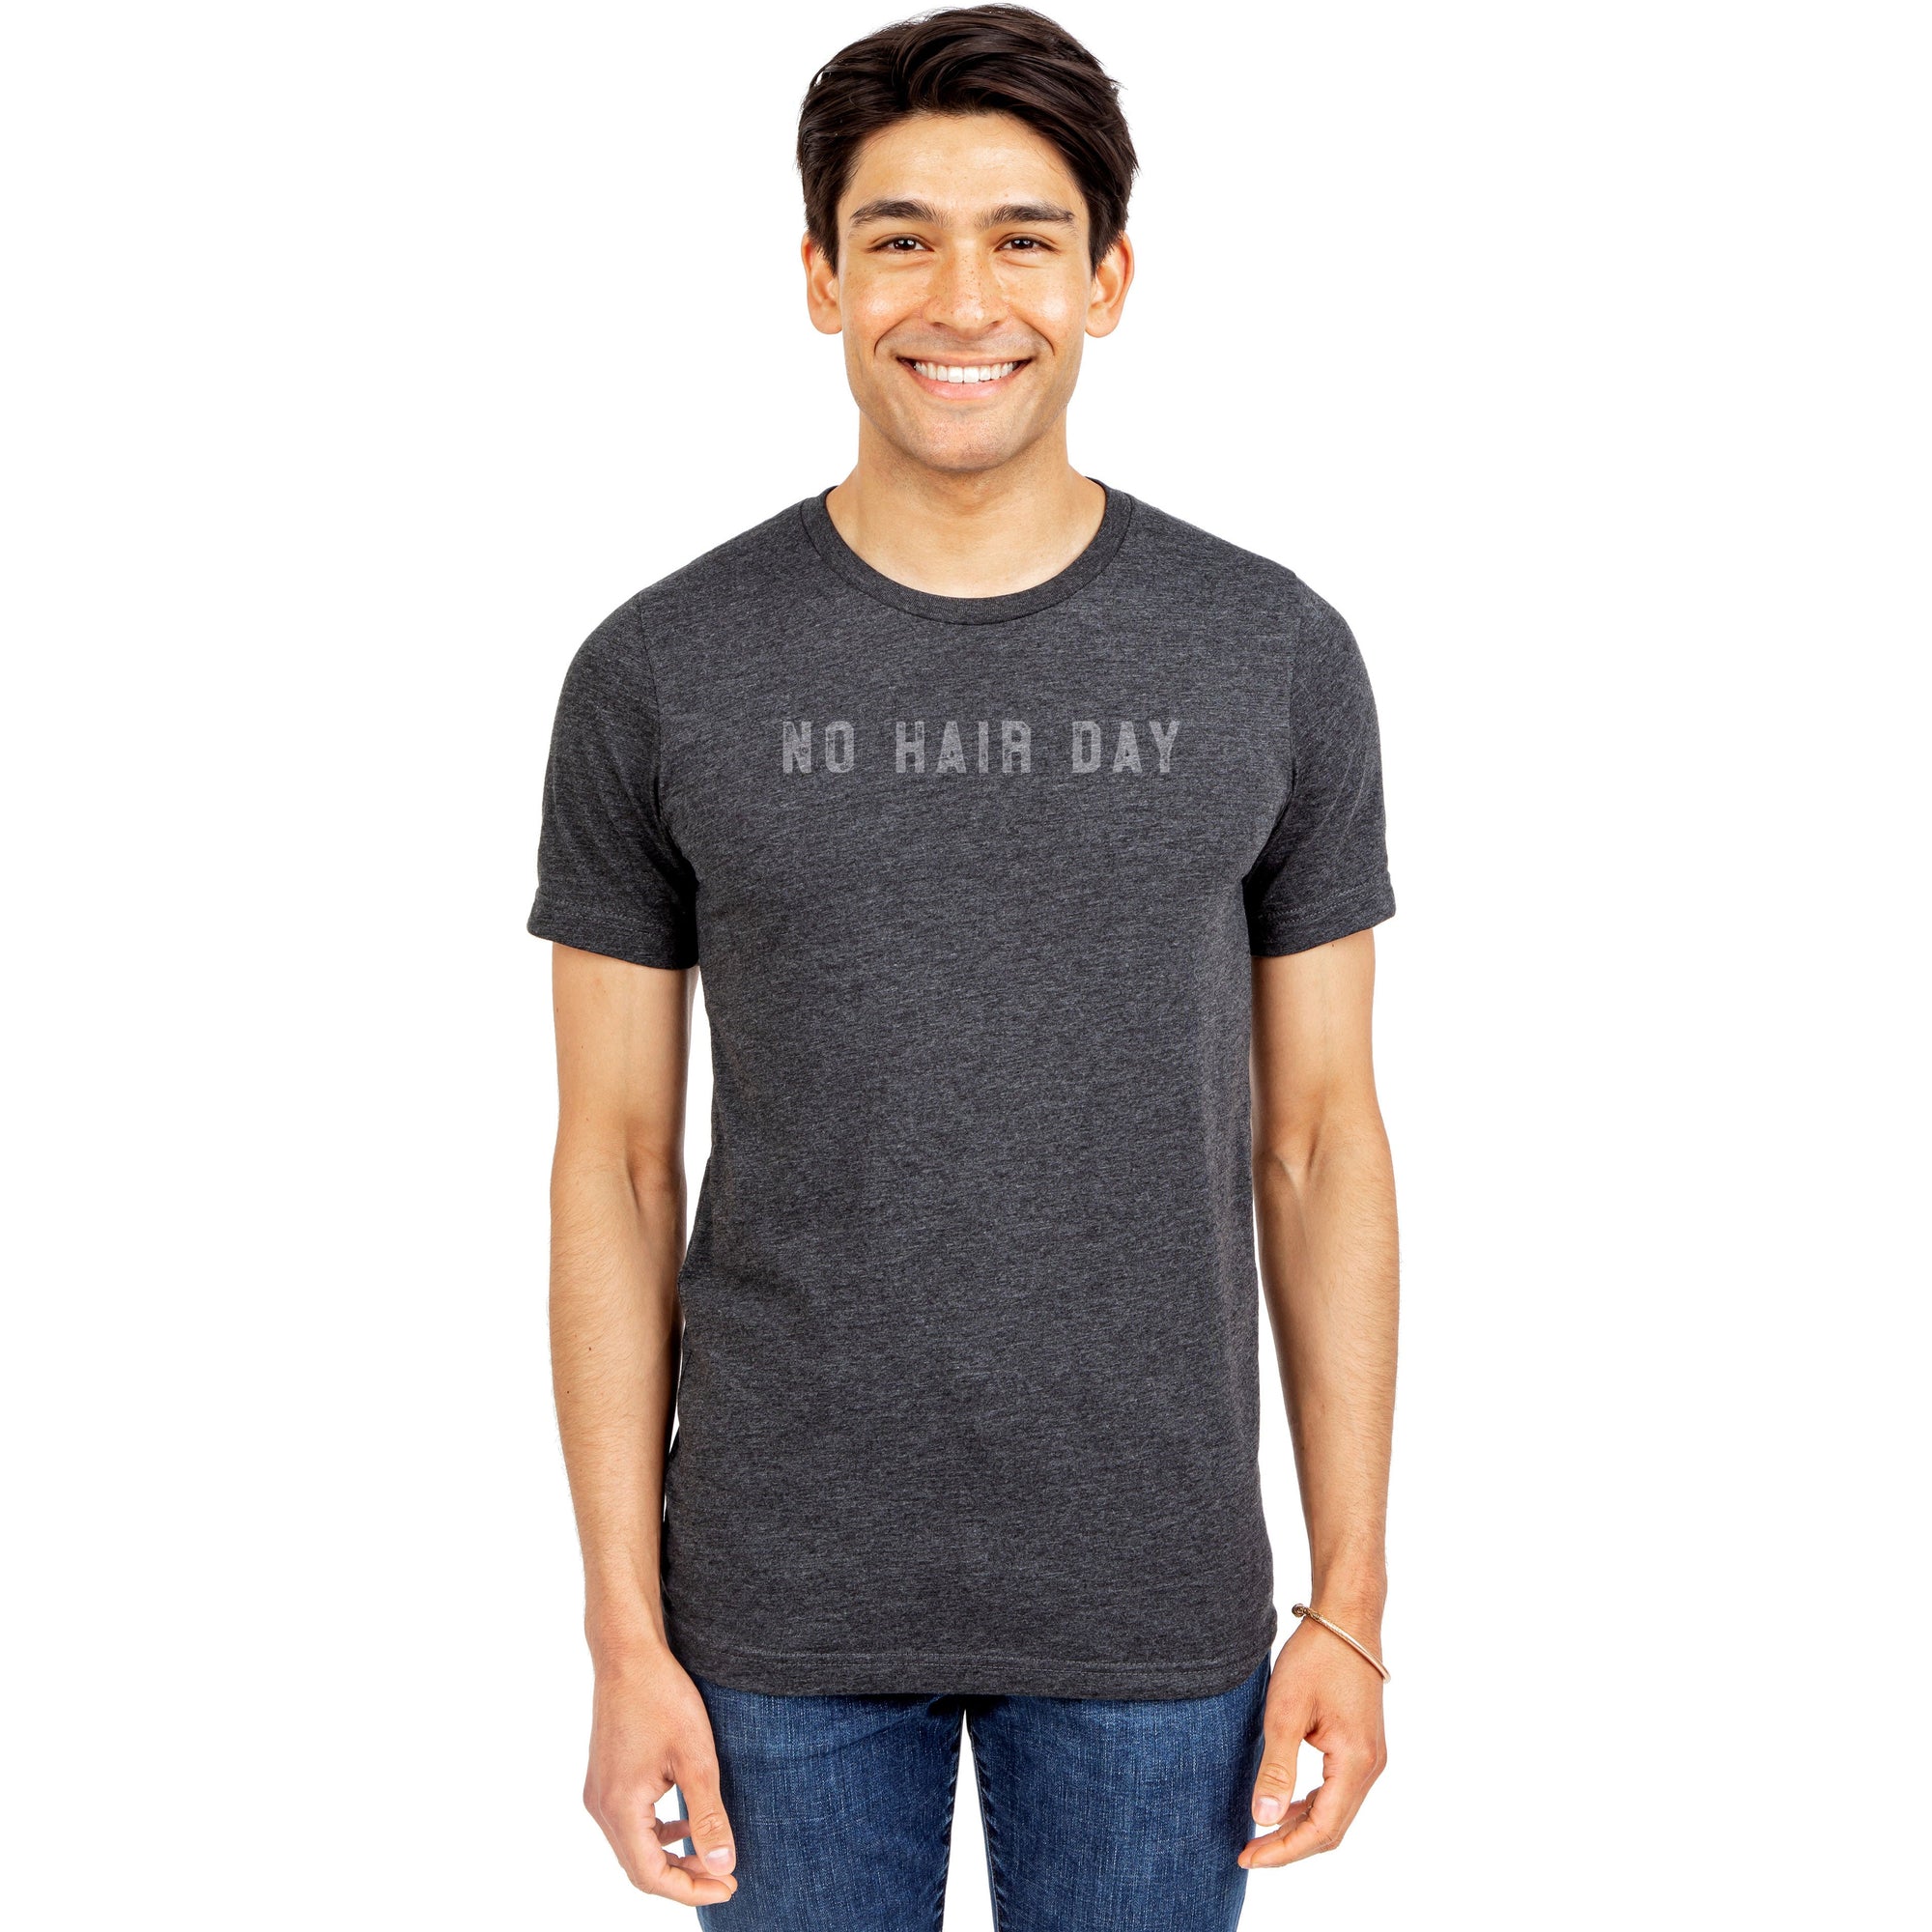 No Hair Day Charcoal Printed Graphic Men's Crew T-Shirt Tee Model